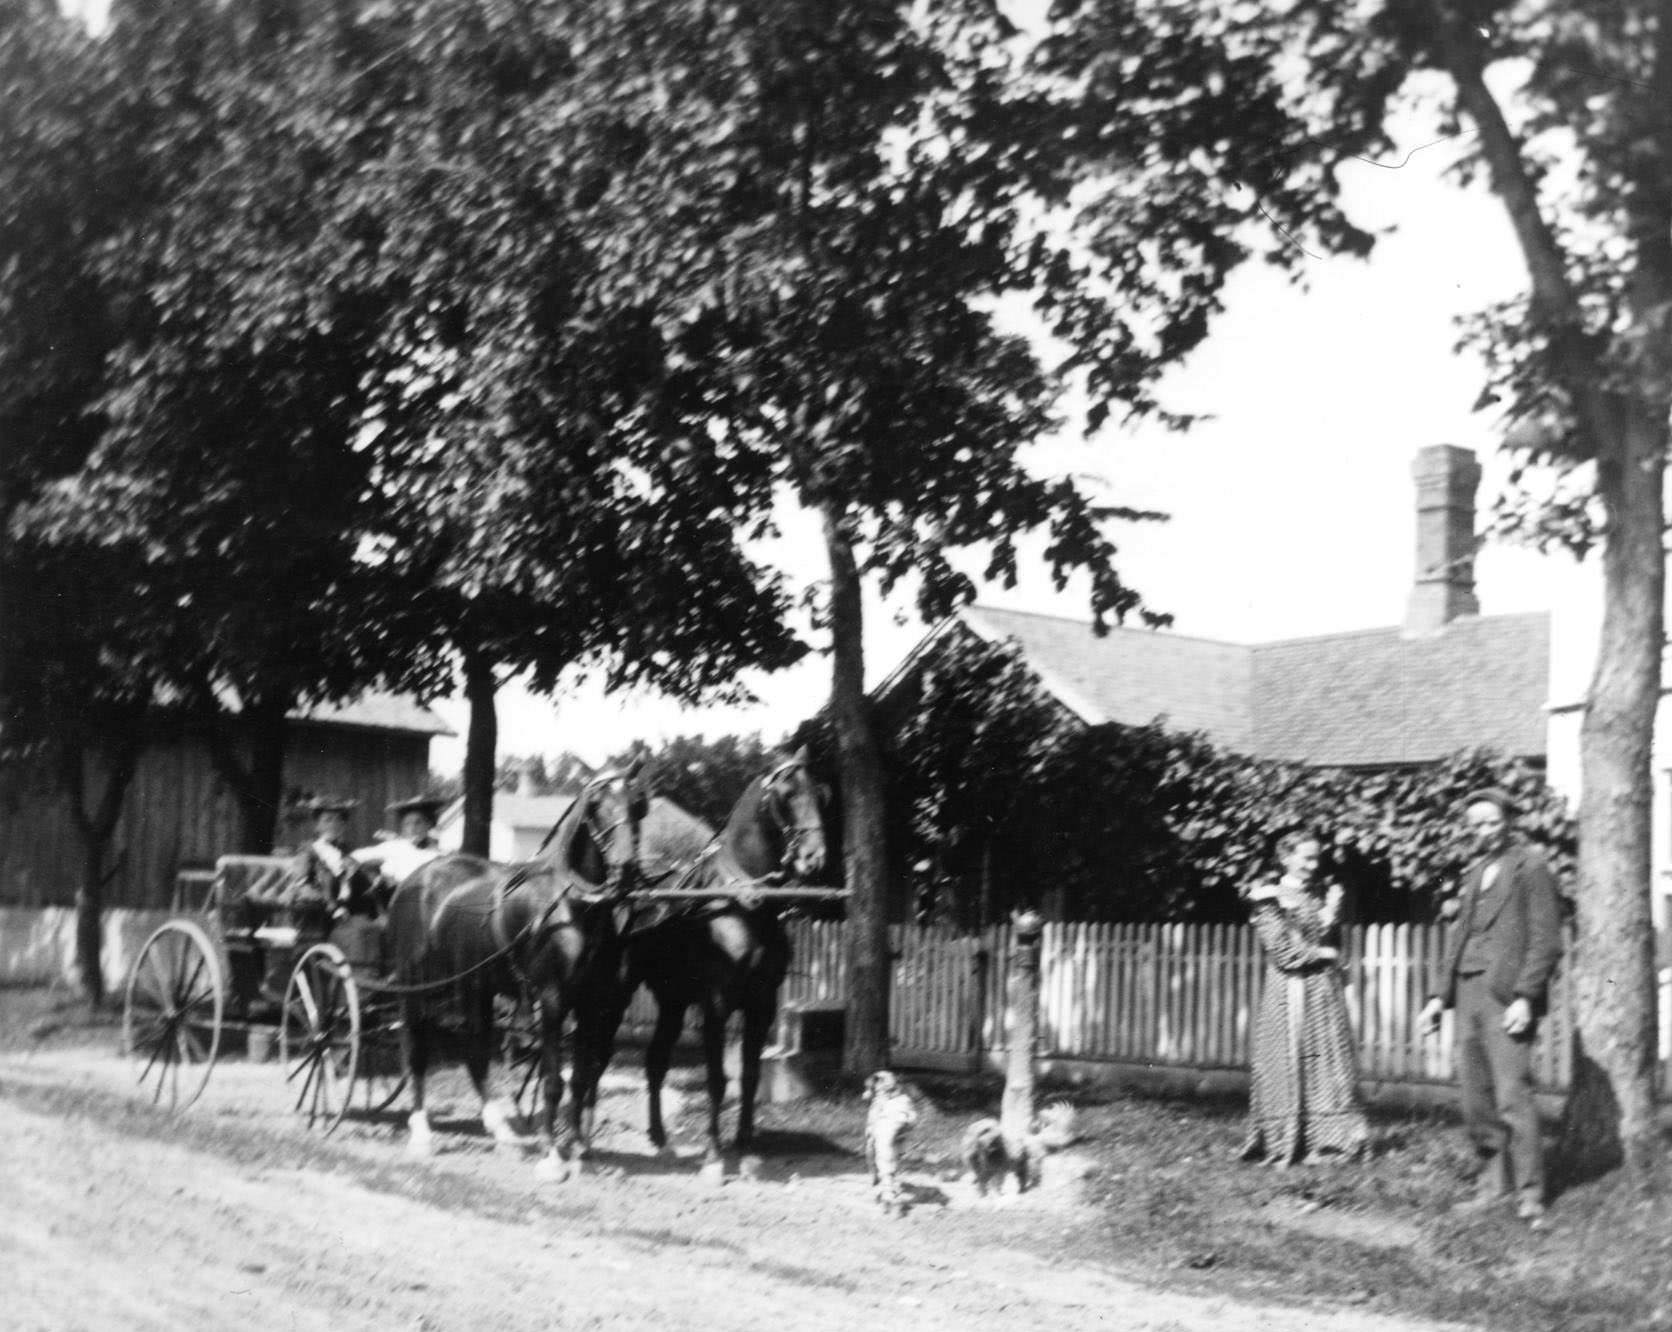 Kate and Ellen Nelson in front of their house with dog and horse-drawn carriage, 1890